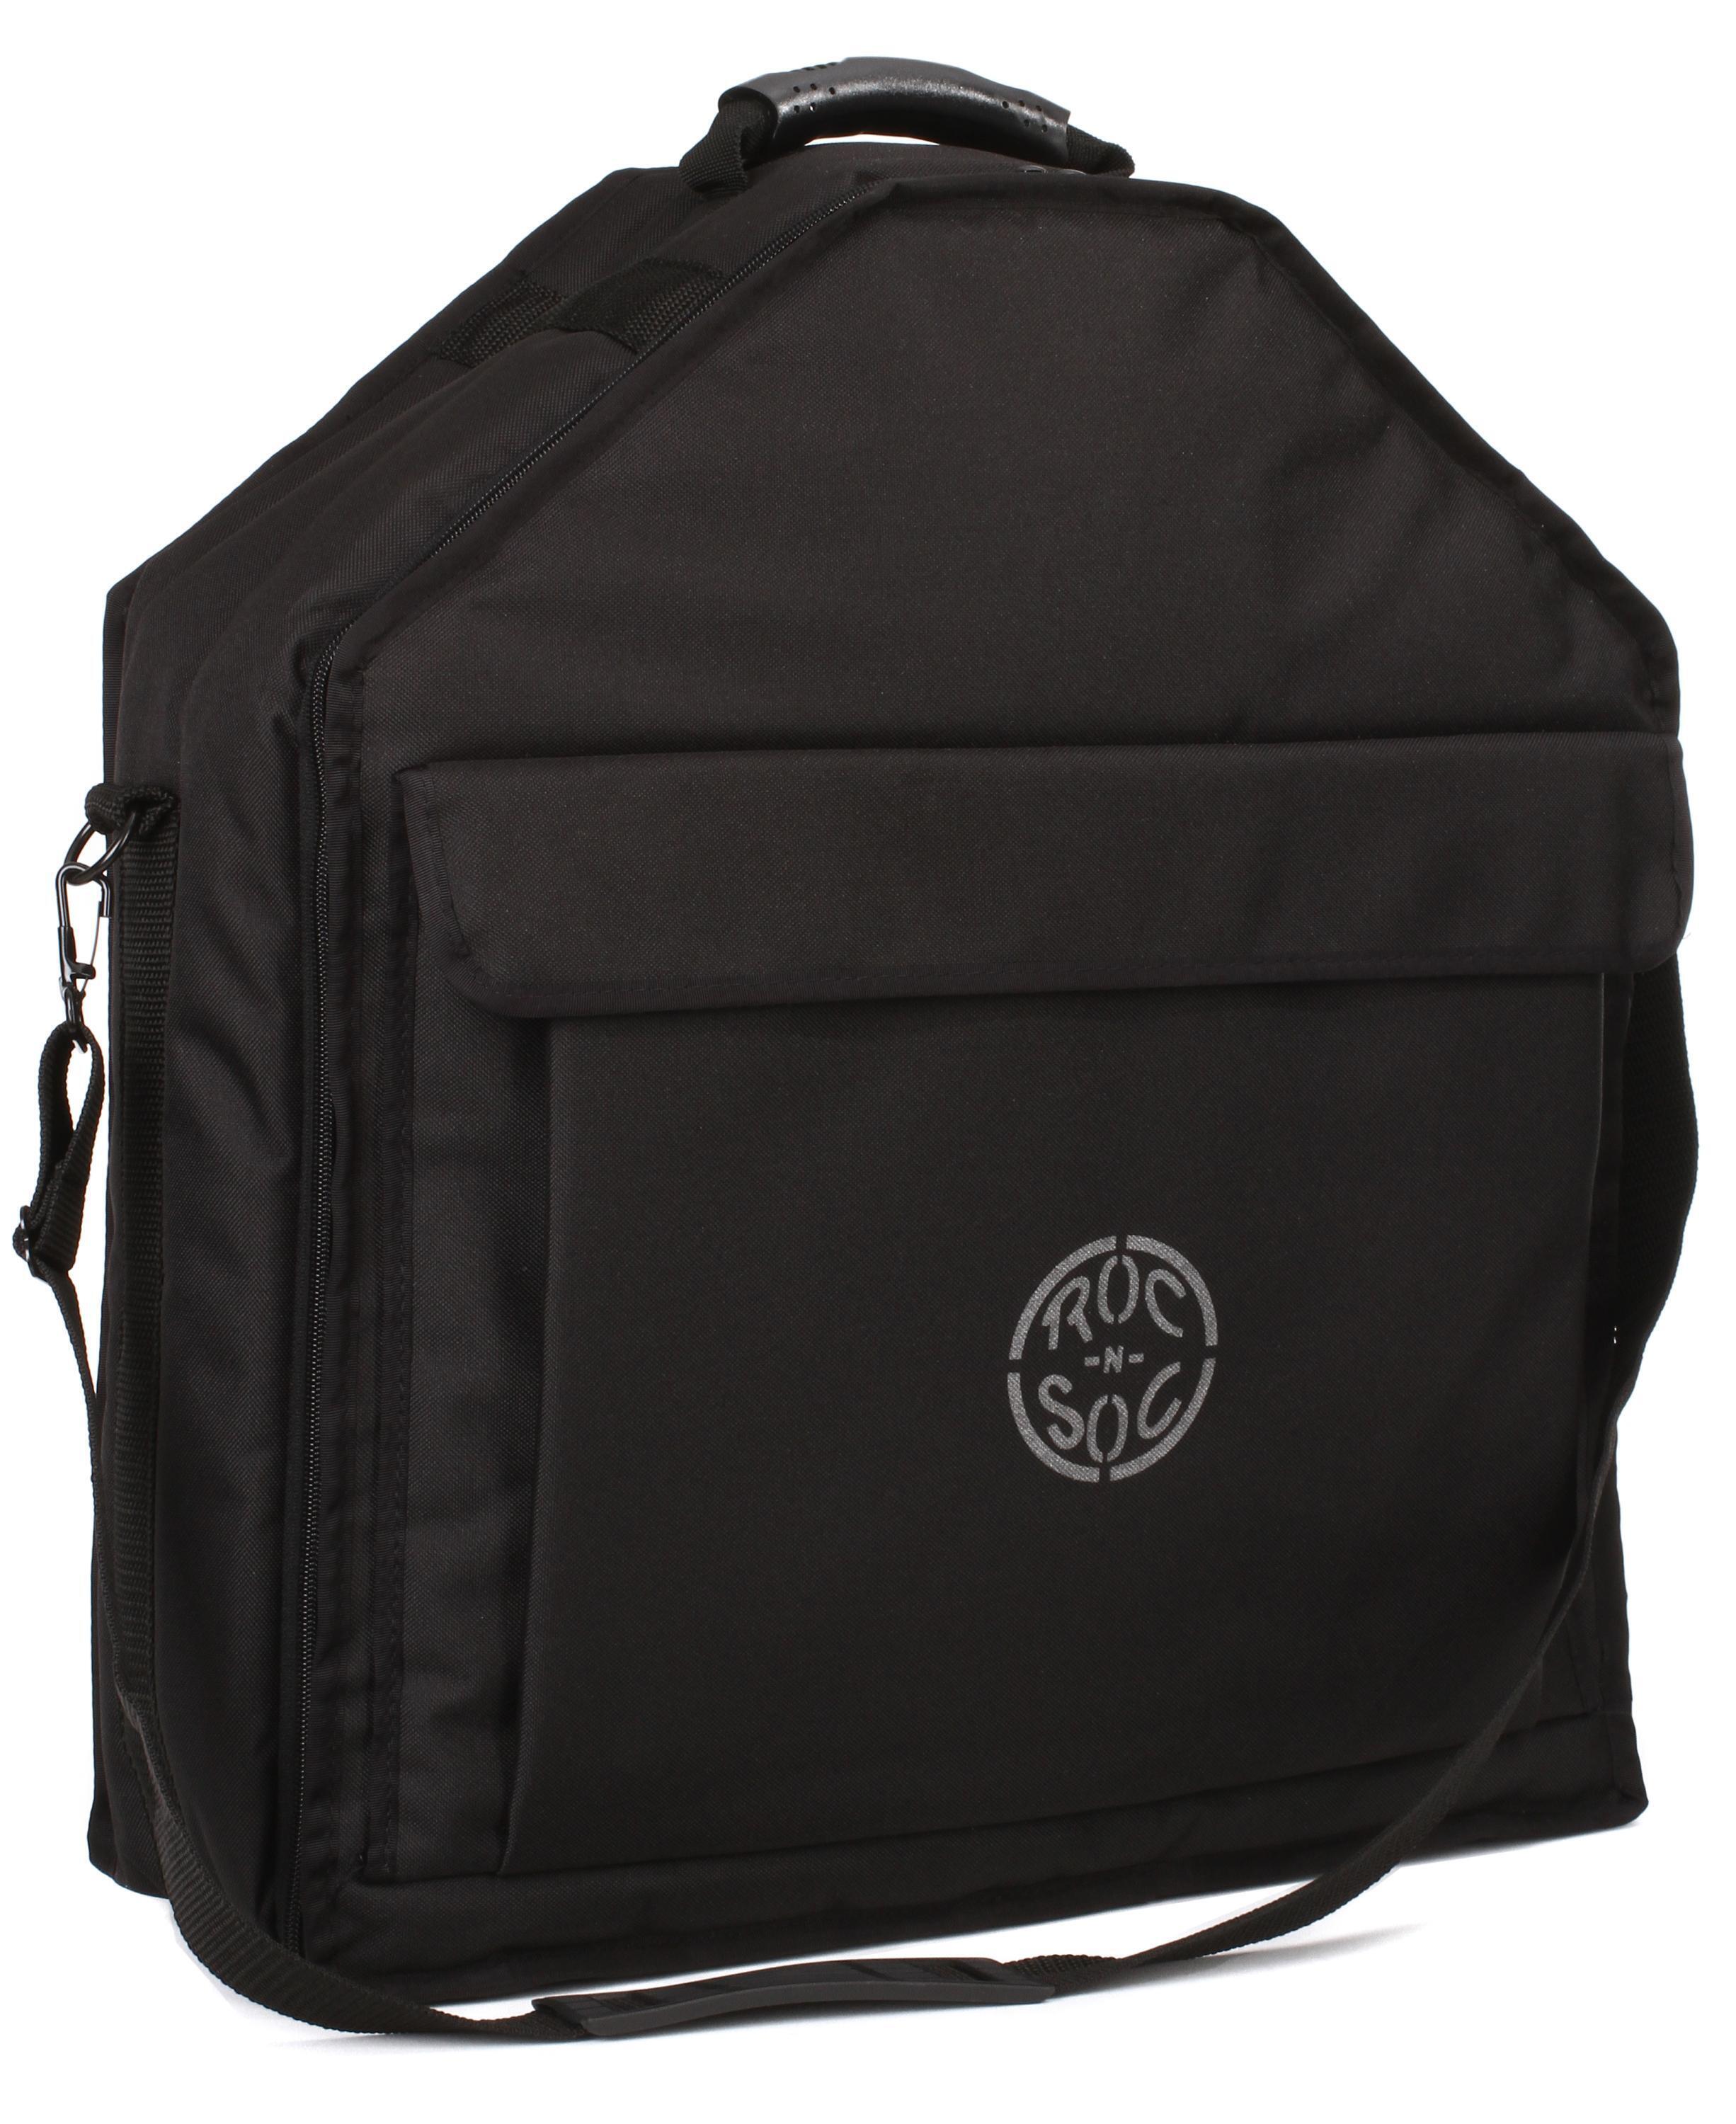 Roc-N-Soc The Bag Drum Throne Carrying Case